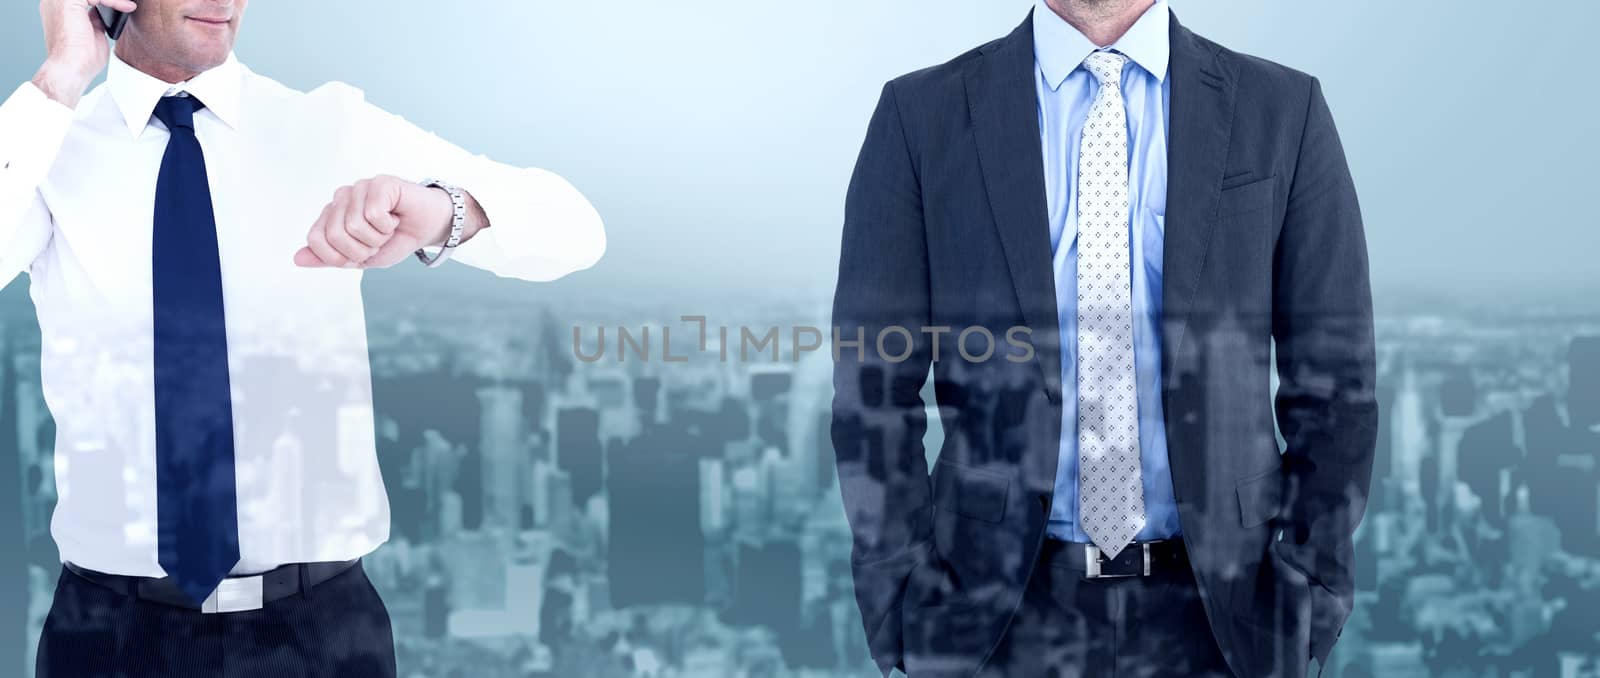 Businessman on the phone looking at his wrist watch against high angle view of city